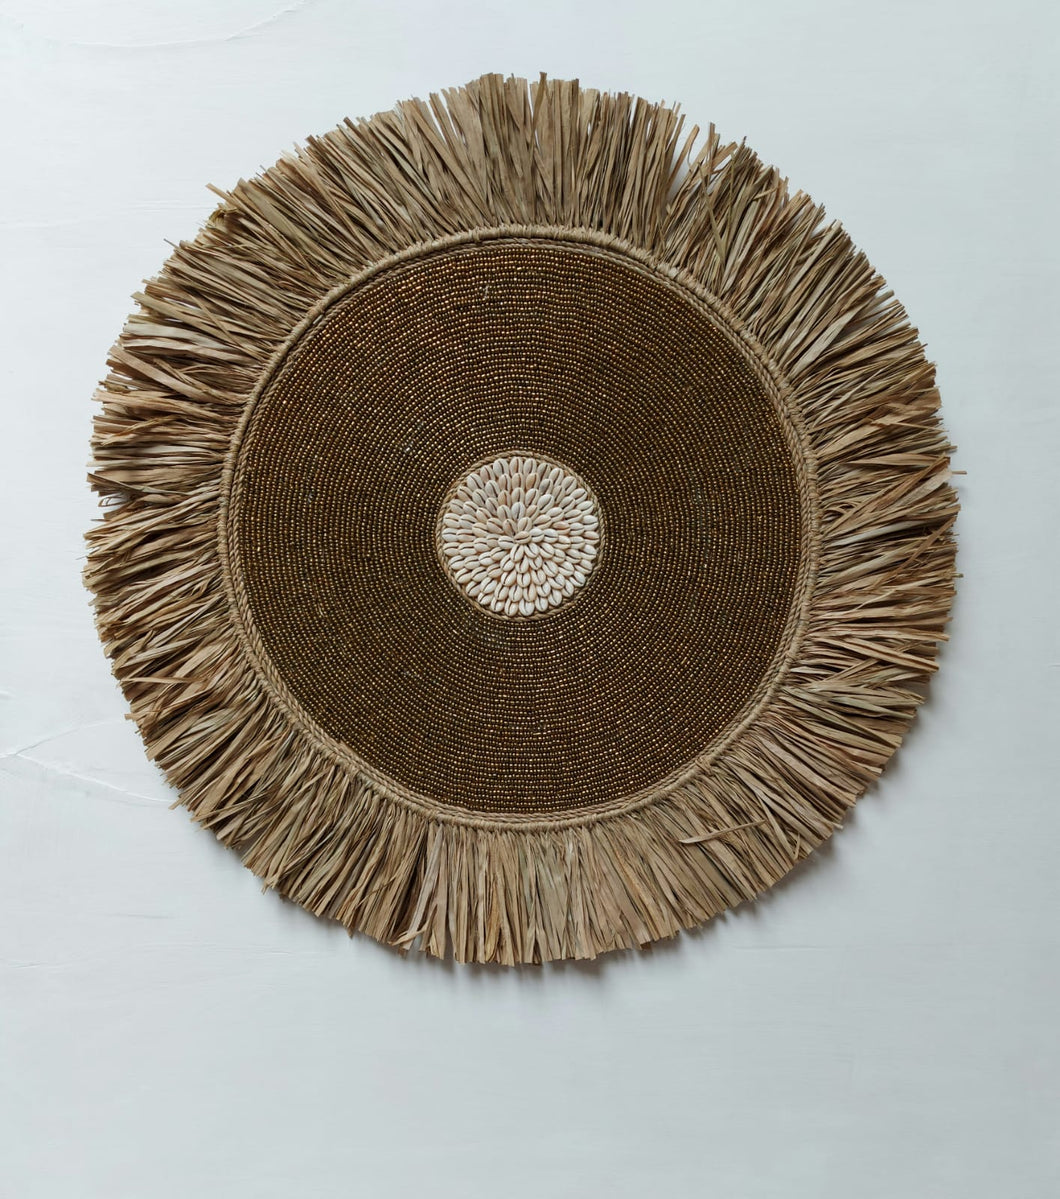 Raffia Cowrie Beaded Shield with Shells in Tan and Natural